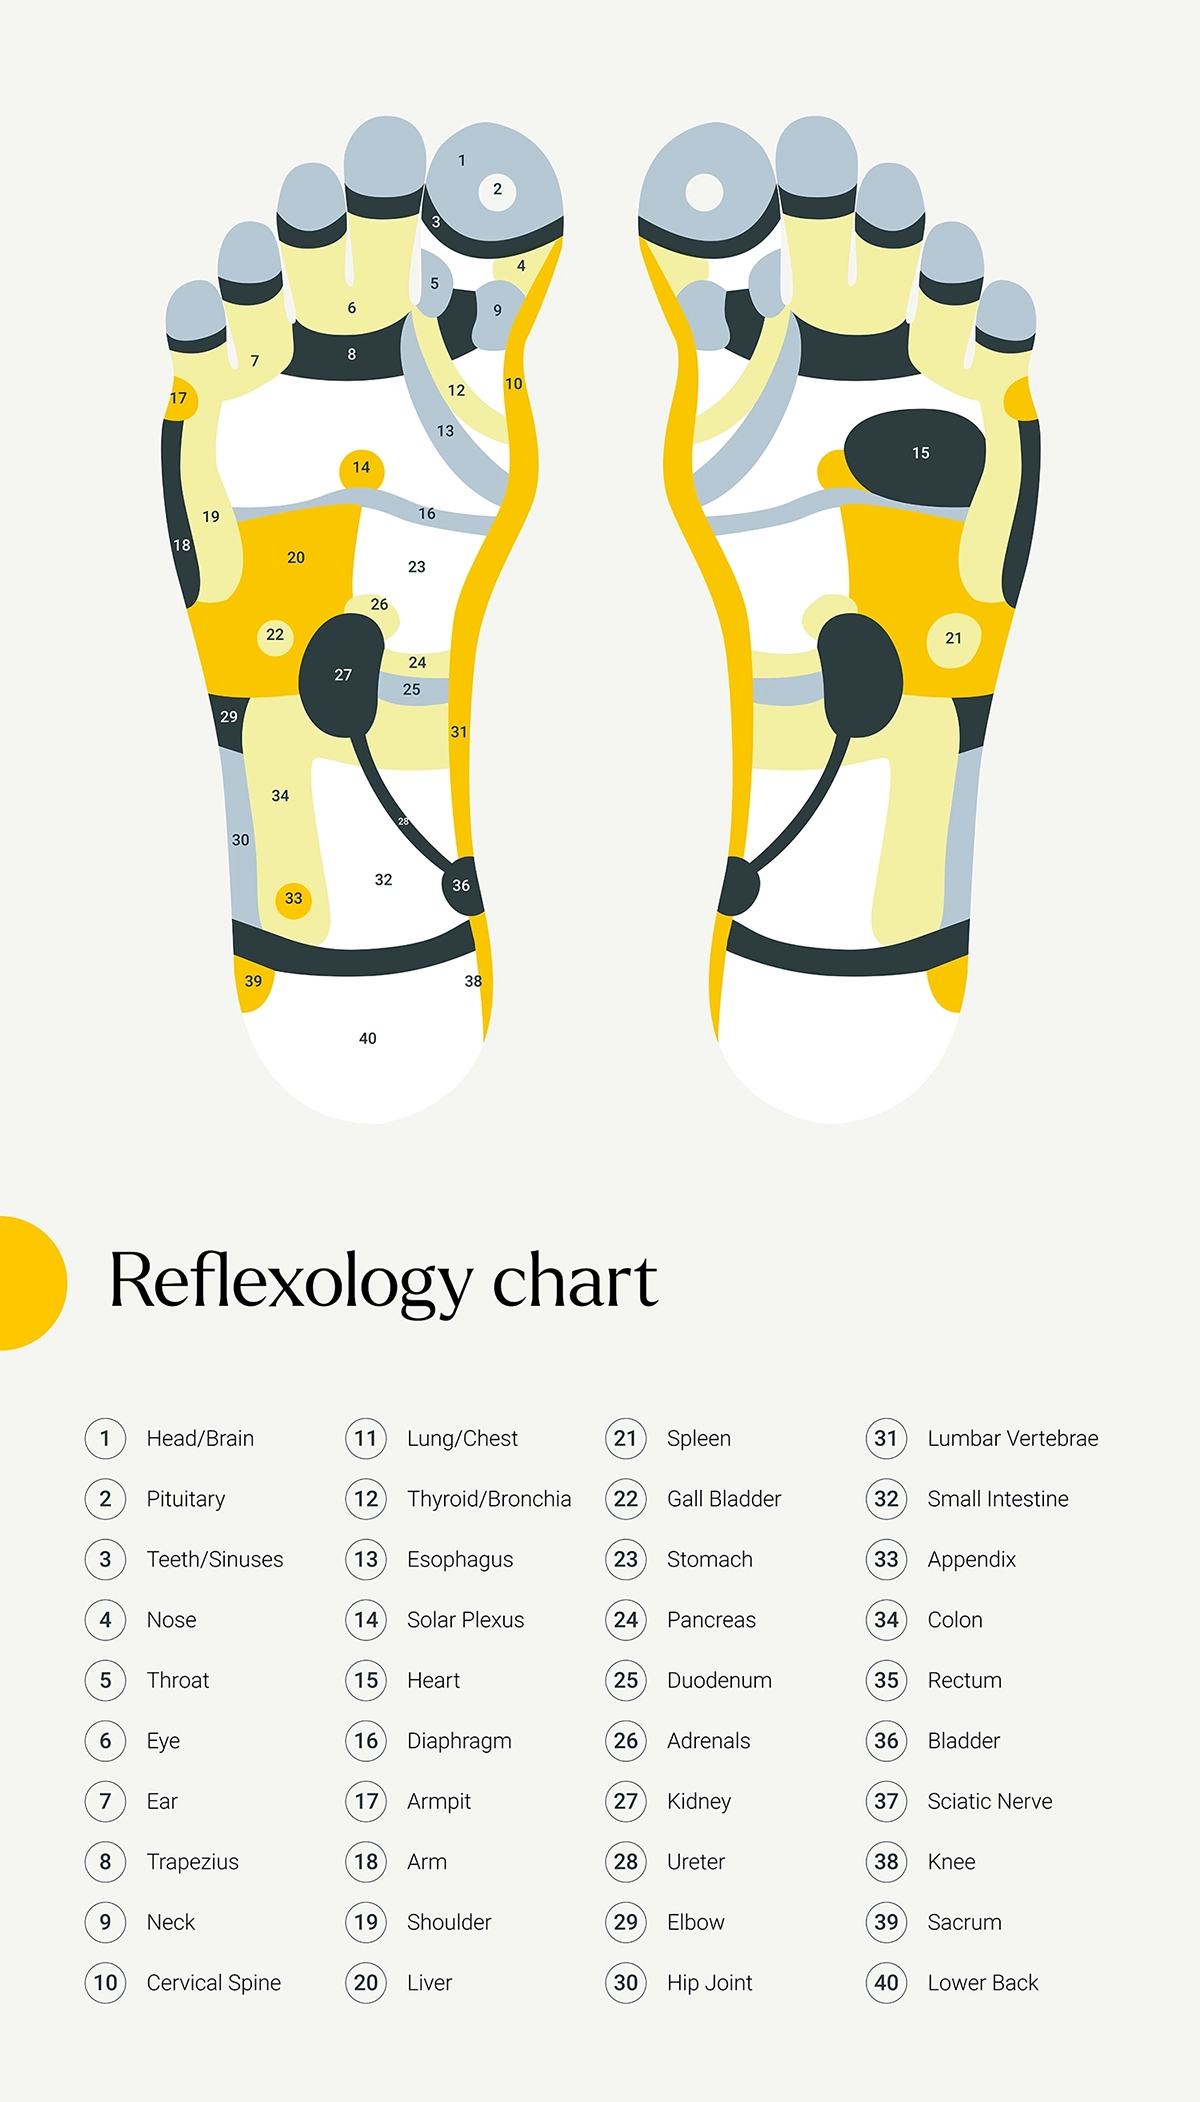 Reflexology foot chart illustrating pressure points and zones of body